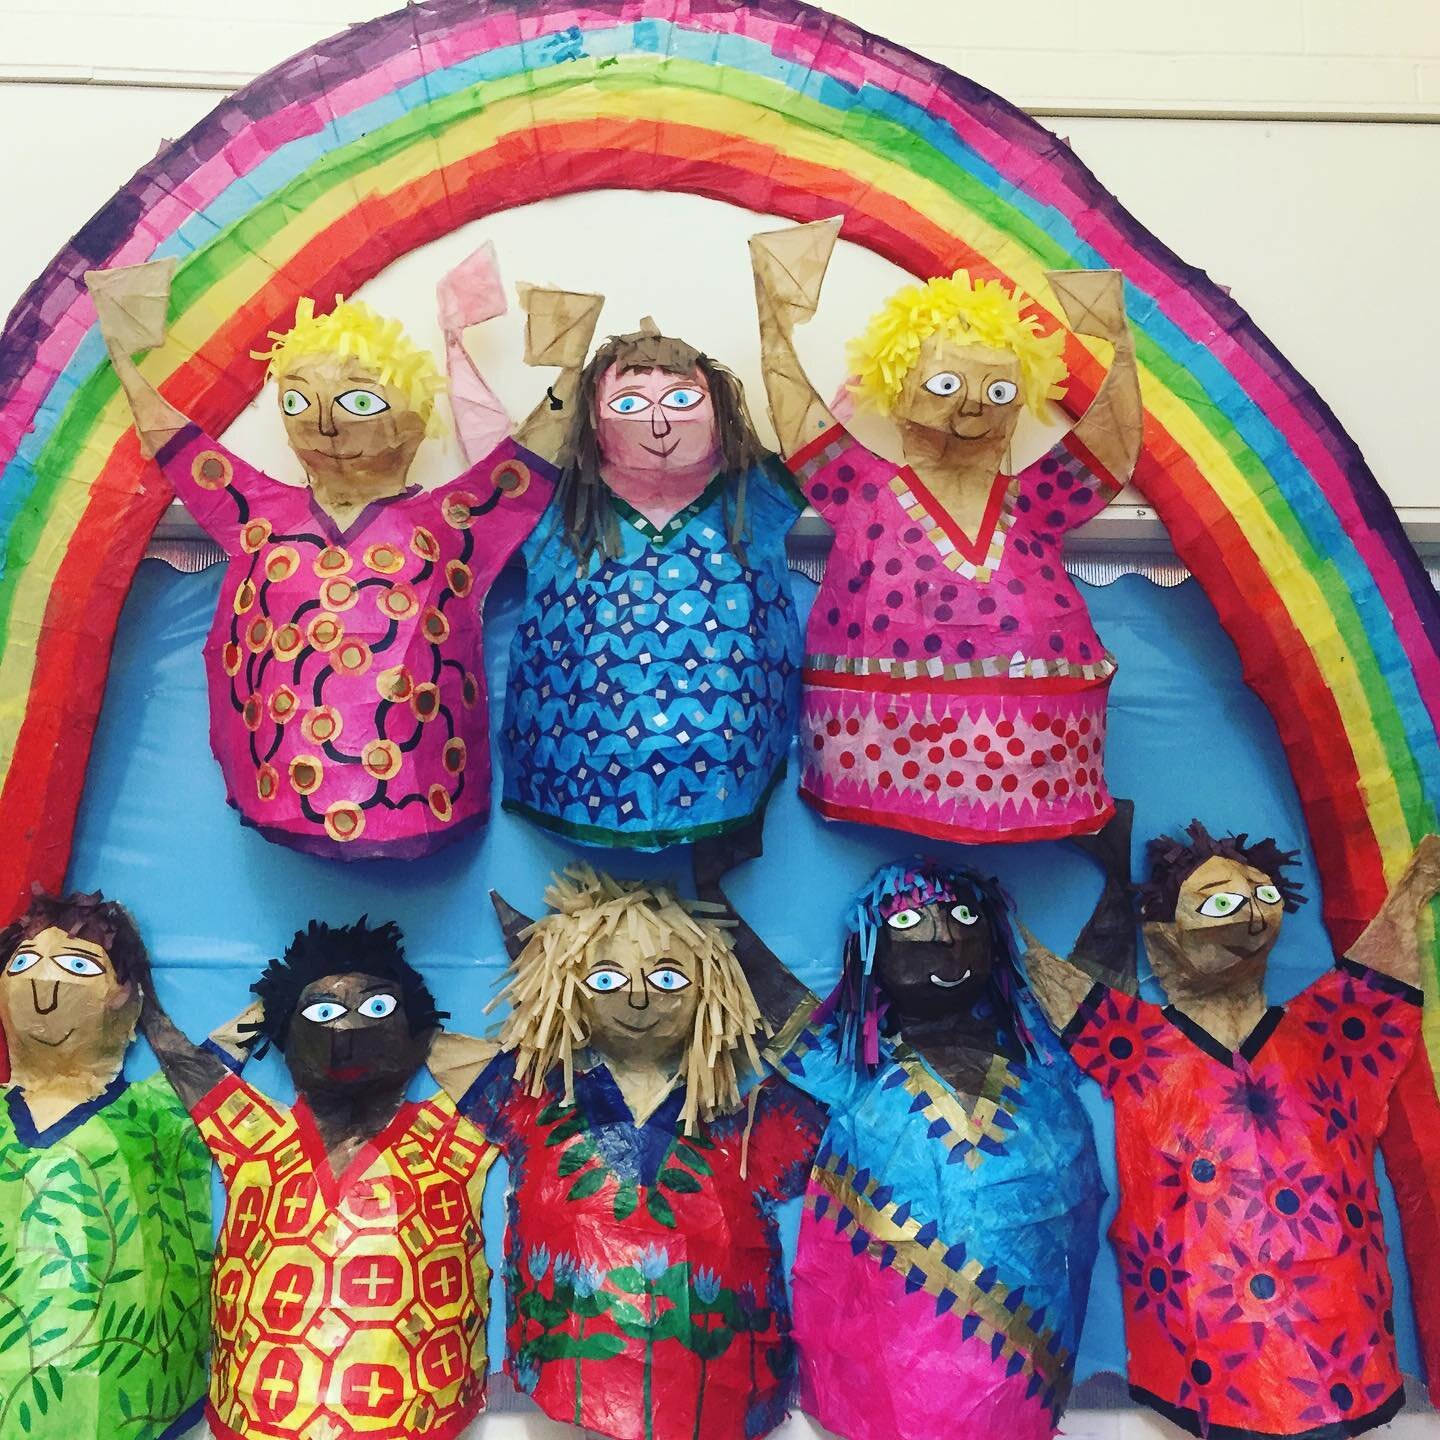 Rainbow people, celebrating diversity and pride in our school. Created by the whole school at Oxford Grove Primary un #Bolton #pride #schoolvalues #diversity #sculpture #artwork #artworkshops #primaryschool #schoolartworkshops #theschoolartist #willo